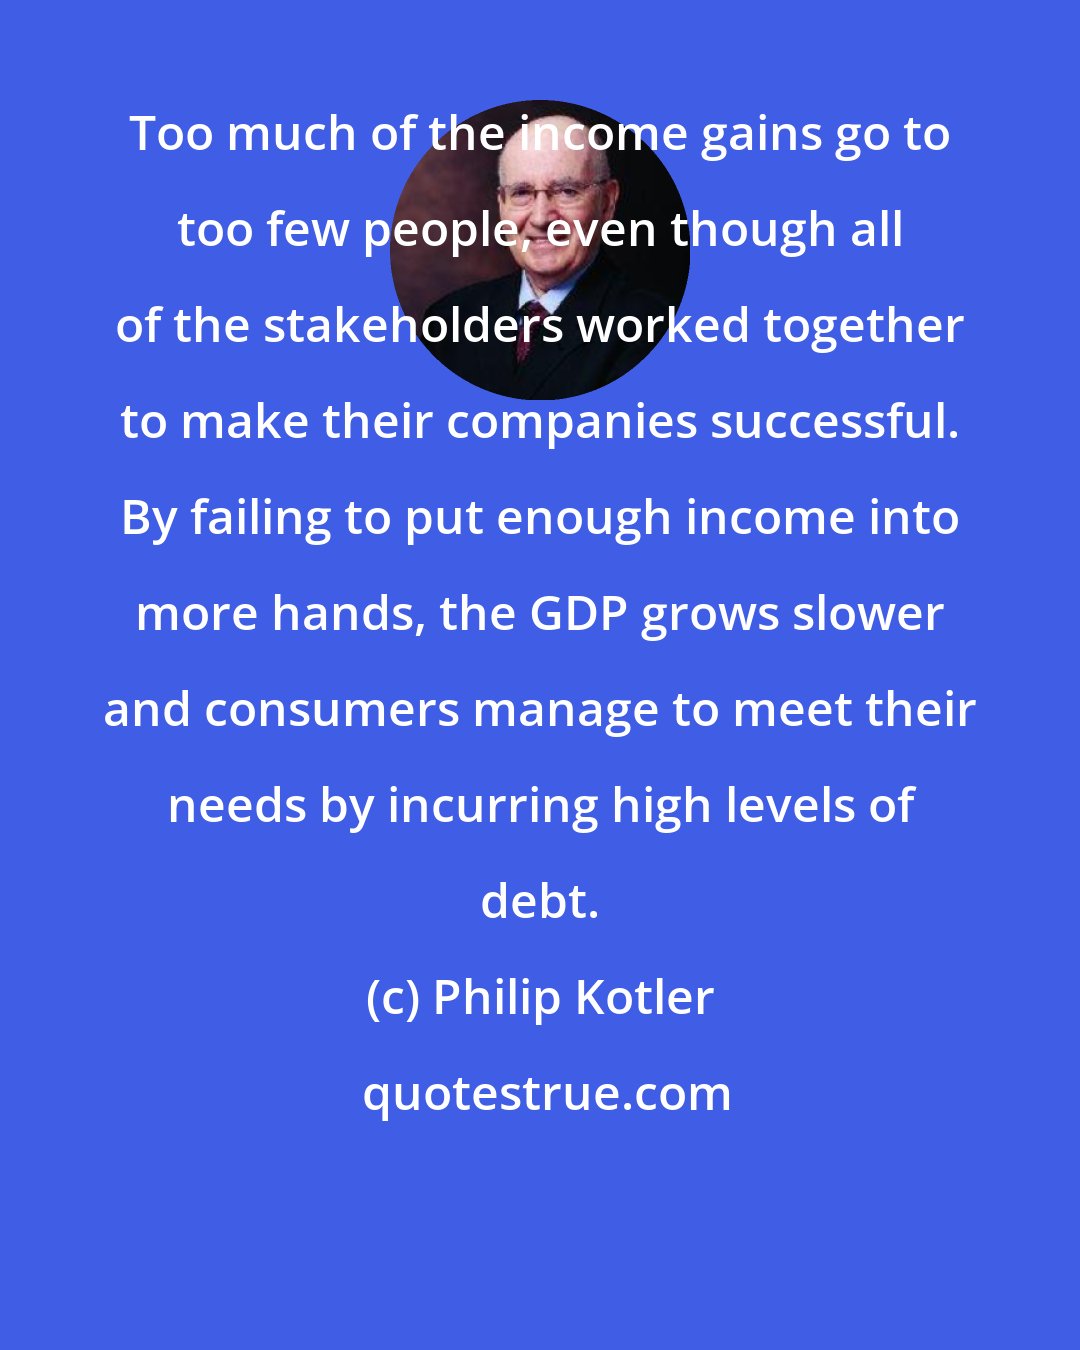 Philip Kotler: Too much of the income gains go to too few people, even though all of the stakeholders worked together to make their companies successful. By failing to put enough income into more hands, the GDP grows slower and consumers manage to meet their needs by incurring high levels of debt.